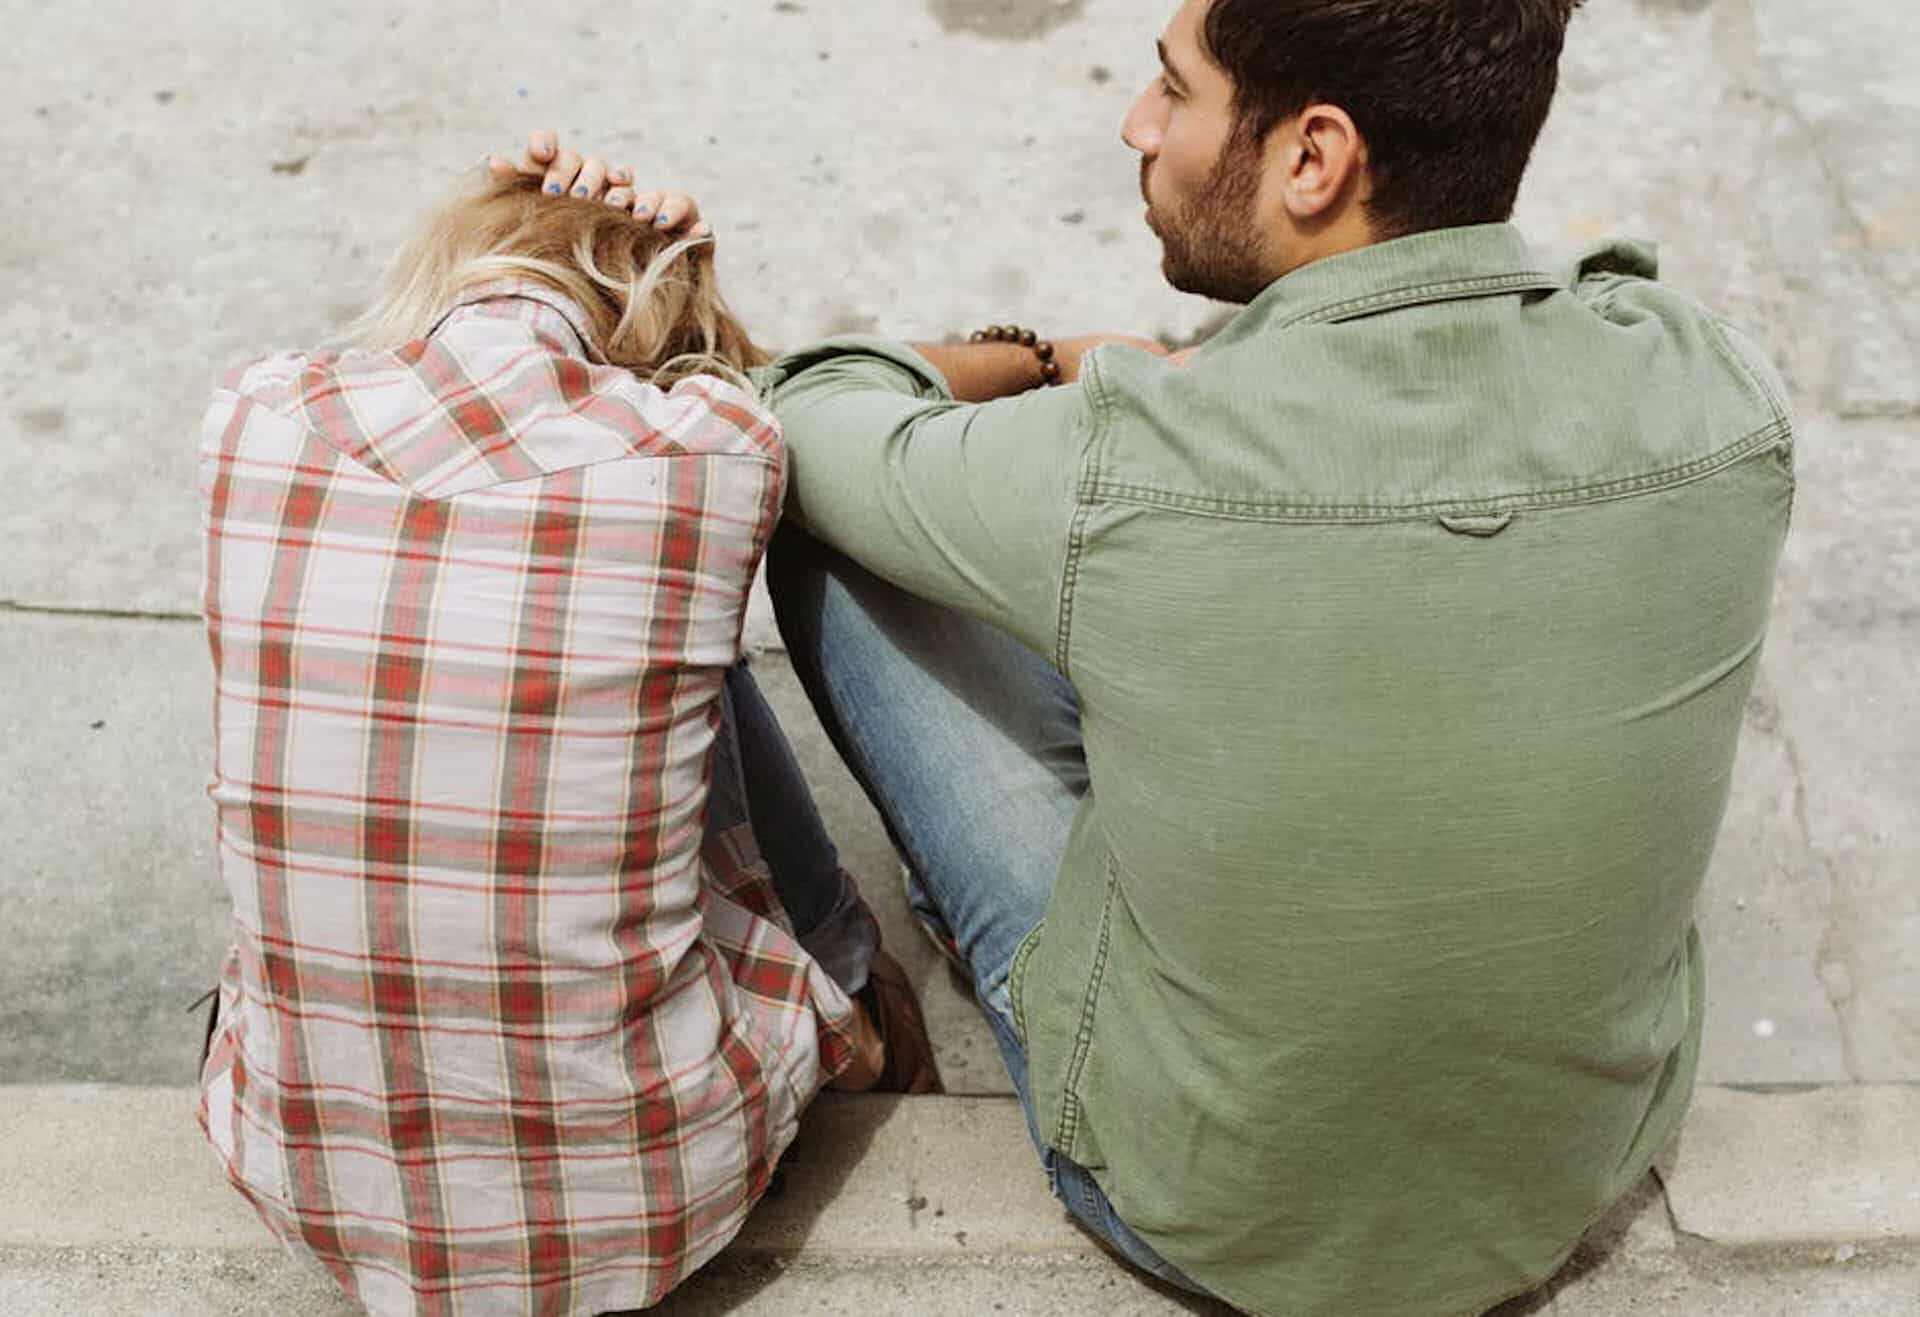 man and woman sitting together by a street while the woman has her head down